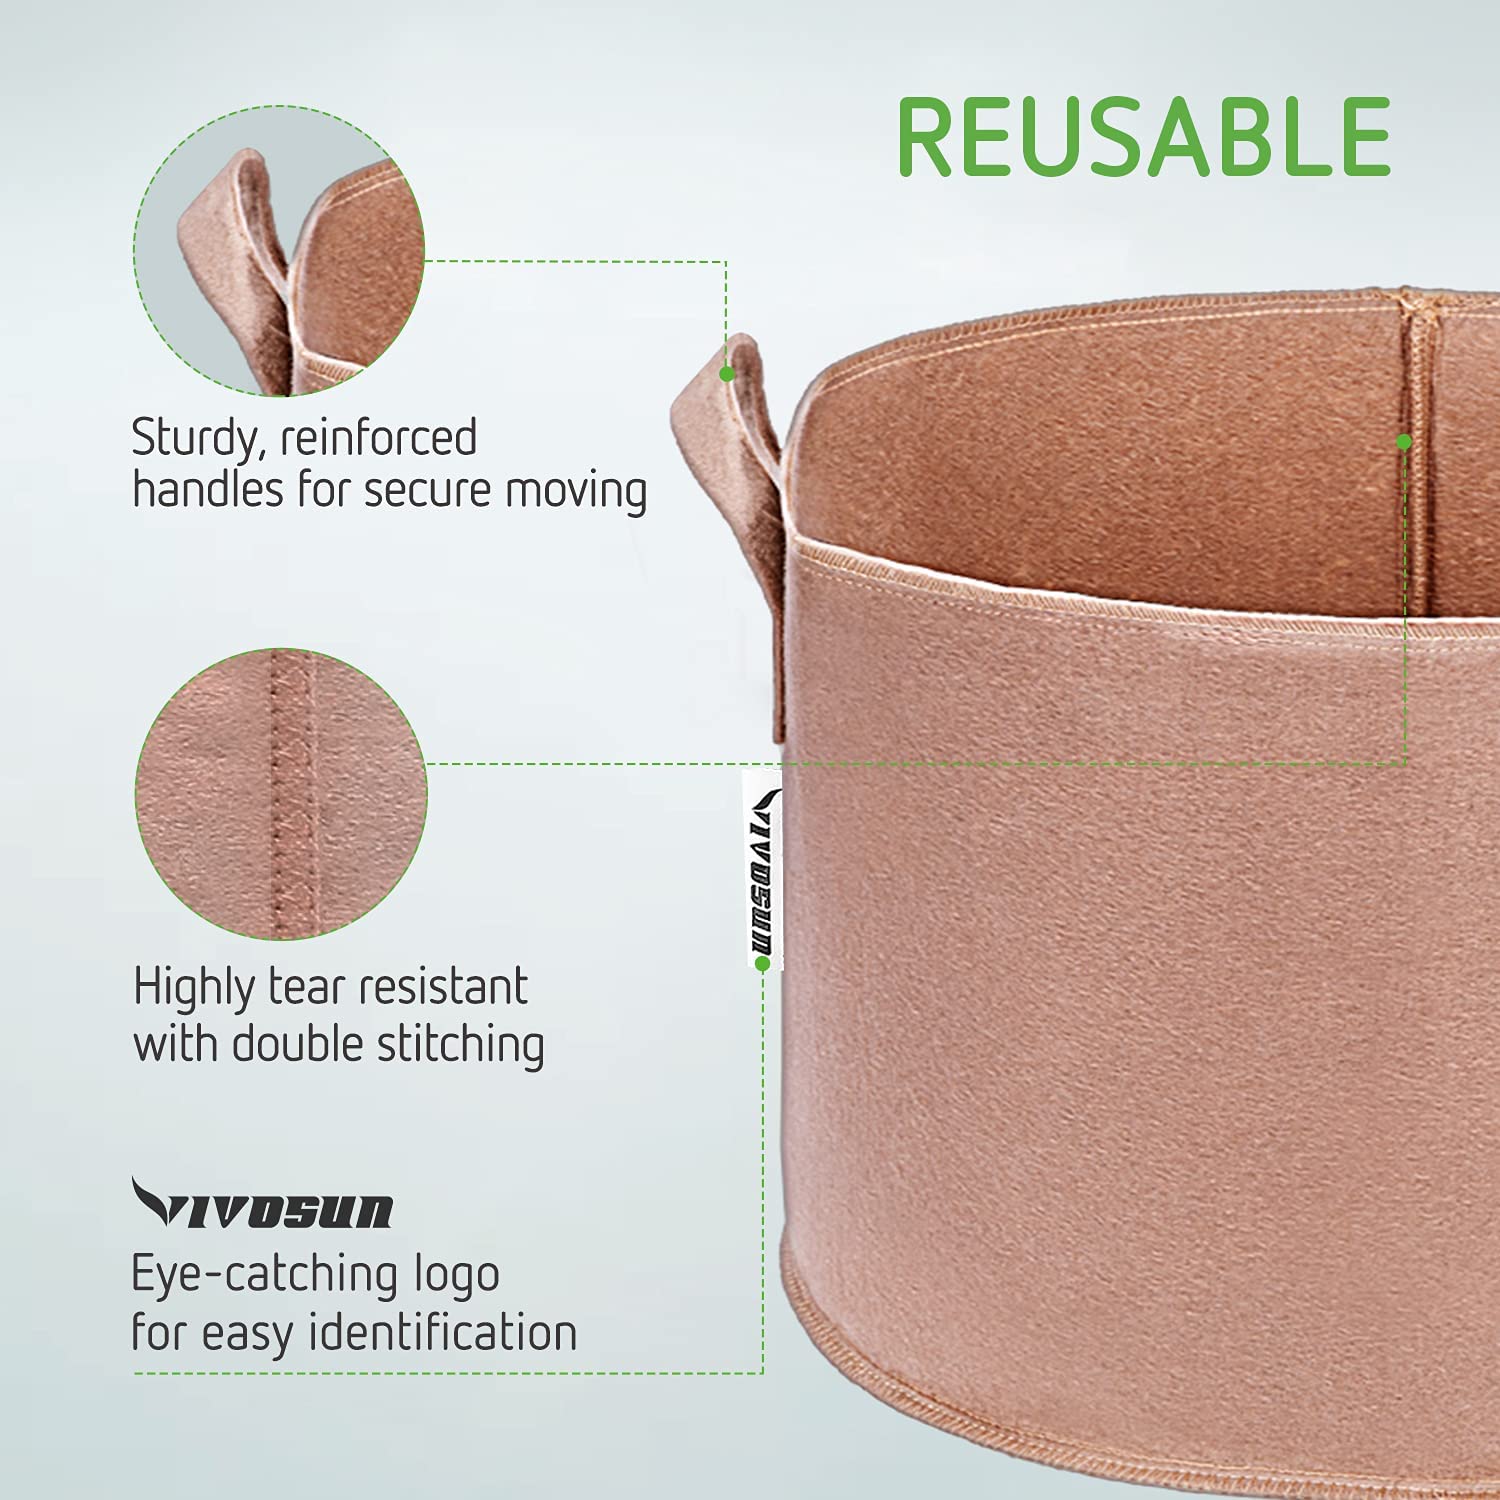 5-Pack 3 Gallons Grow Bags Heavy Duty Thickened Nonwoven Fabric Pots with Strap Handles Tan